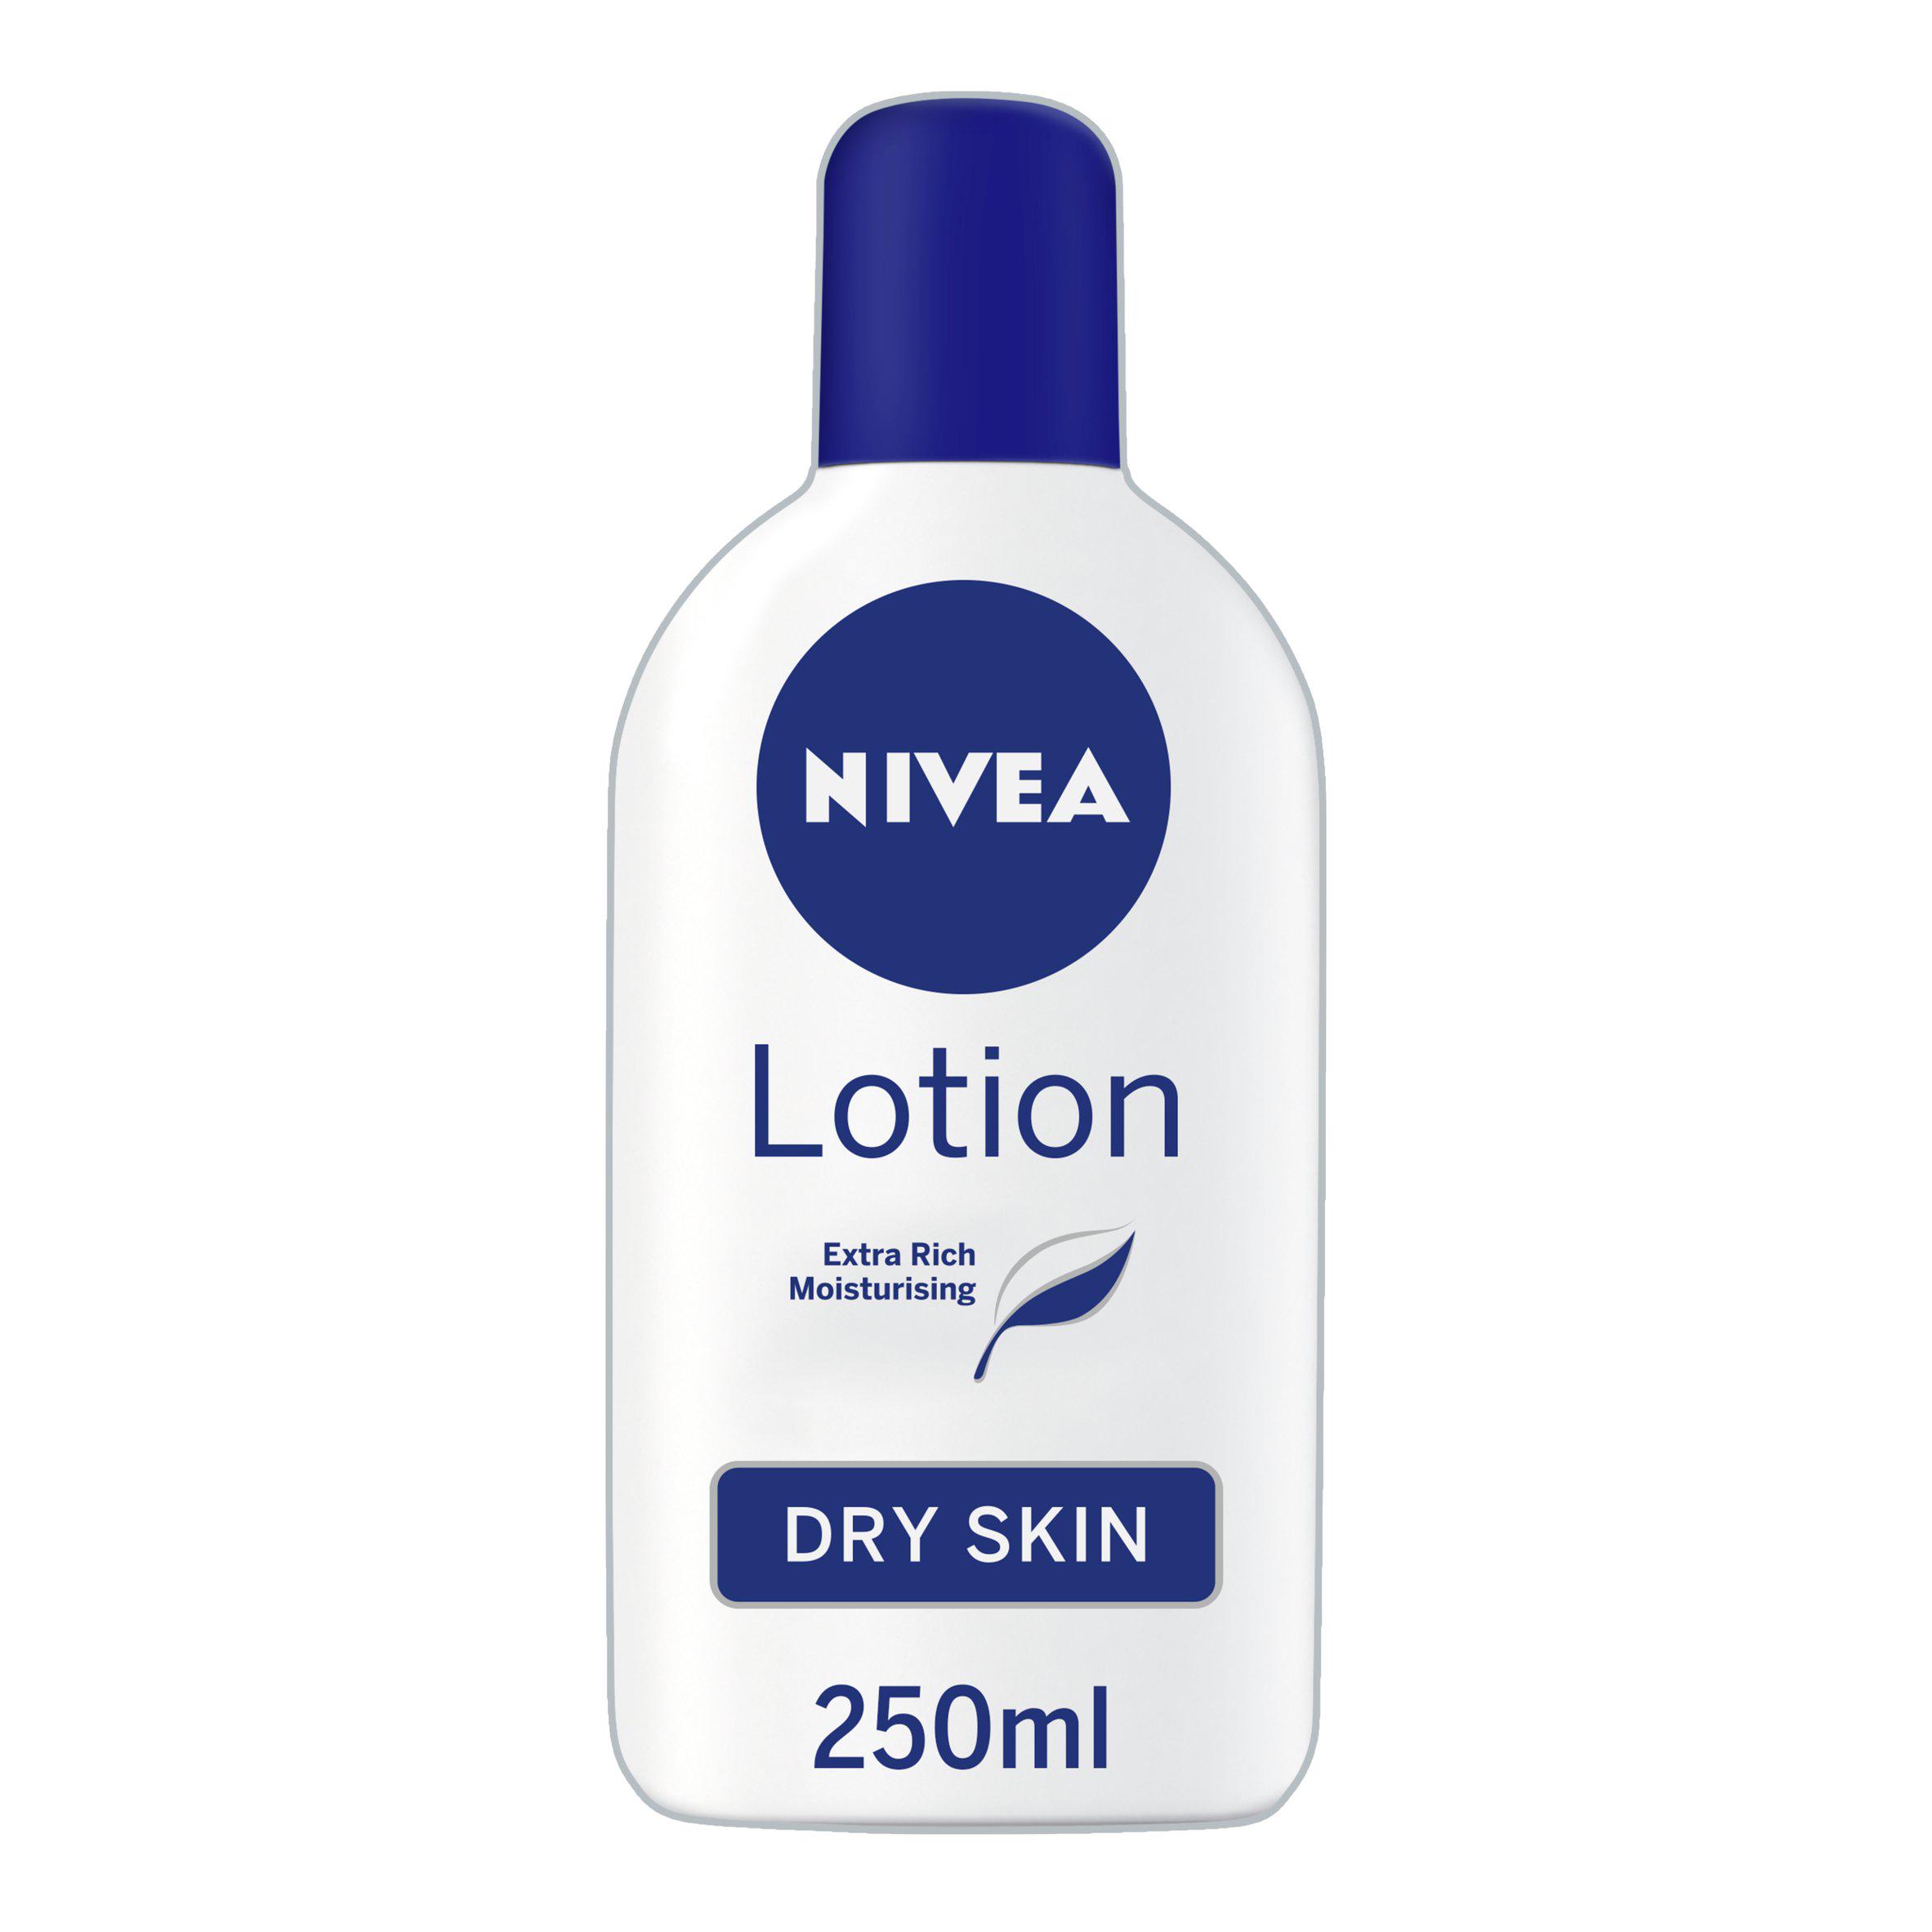 What Is Nivea Lotion